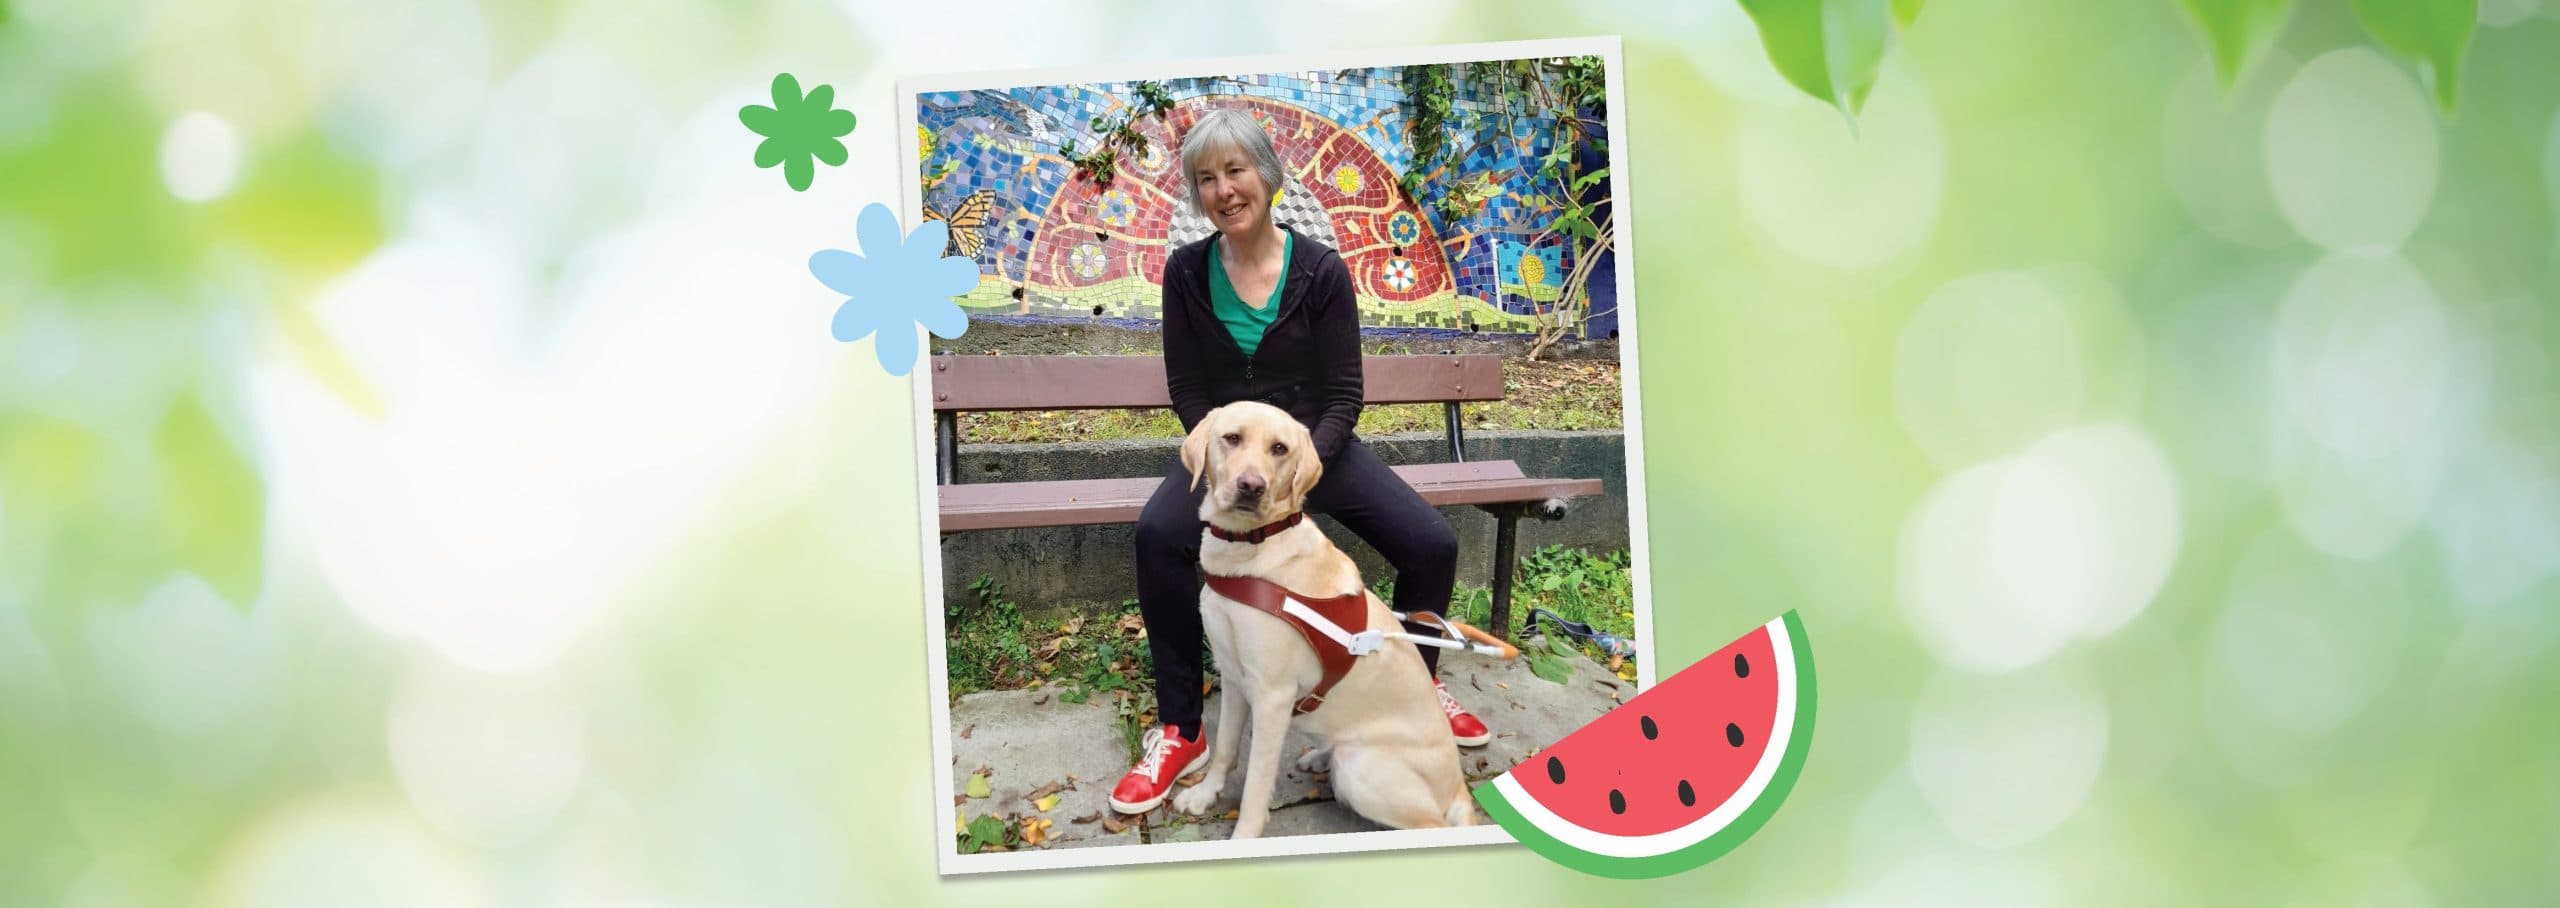 A woman with grey hair sitting on a park bench. There is a colourful mosaic wall in the background. Her yellow Labrador guide dog is wearing a harness and is sitting by her feet. The image is decorated with illustrations of blue flowers and a slice of watermelon.